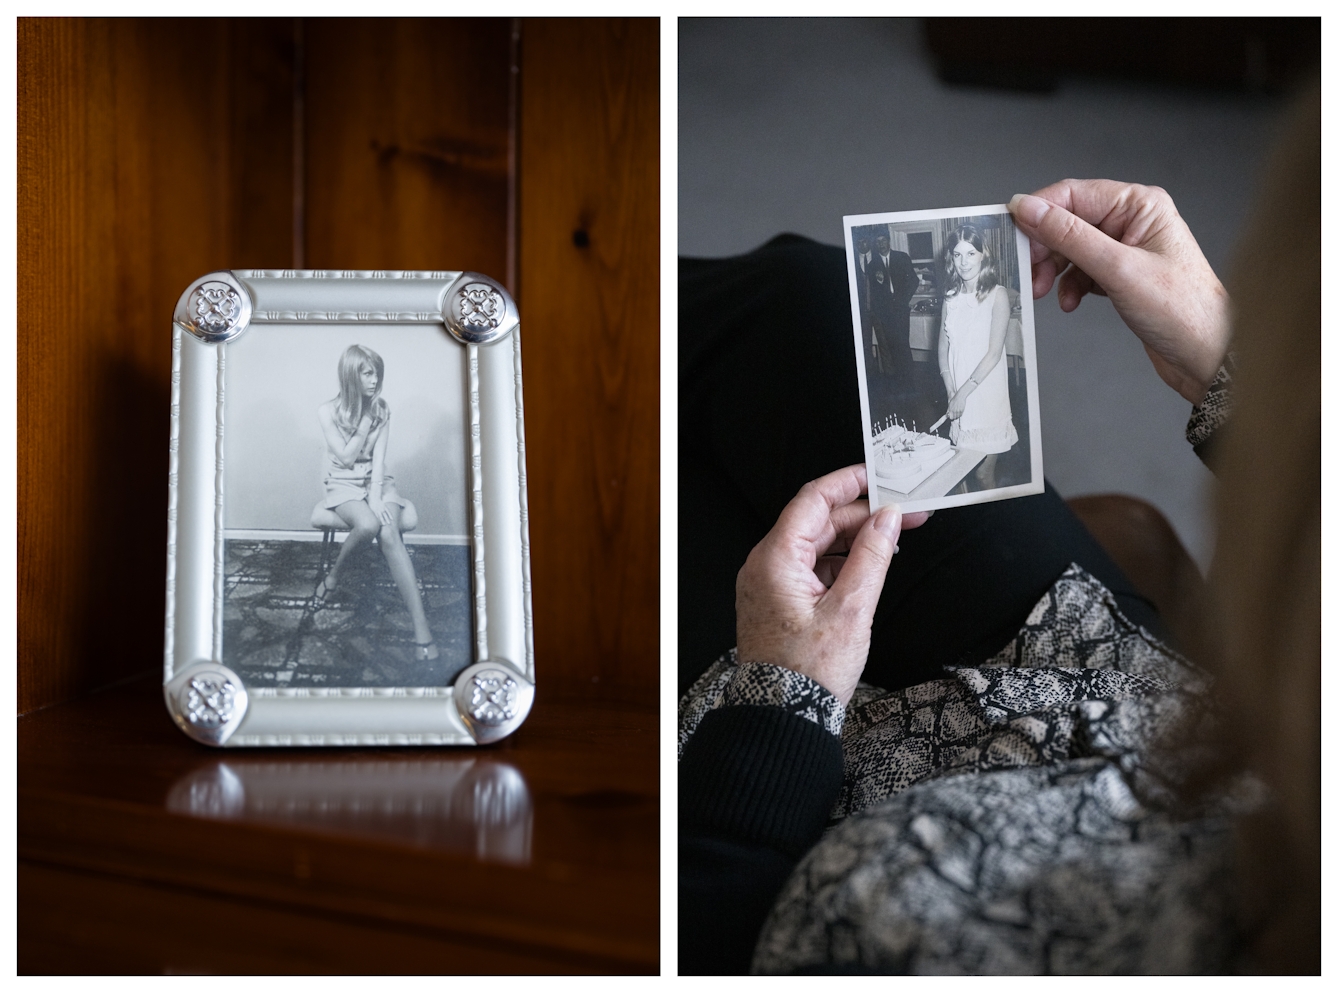 Photographic Diptych of old black and white photographs. The image on the left shows a print in a silver frame on a wooden shelf. The image shows a young woman sitting on a chair. The image on the right shows the same woman cutting a birthday cake. The print is being held in Marie's hands.